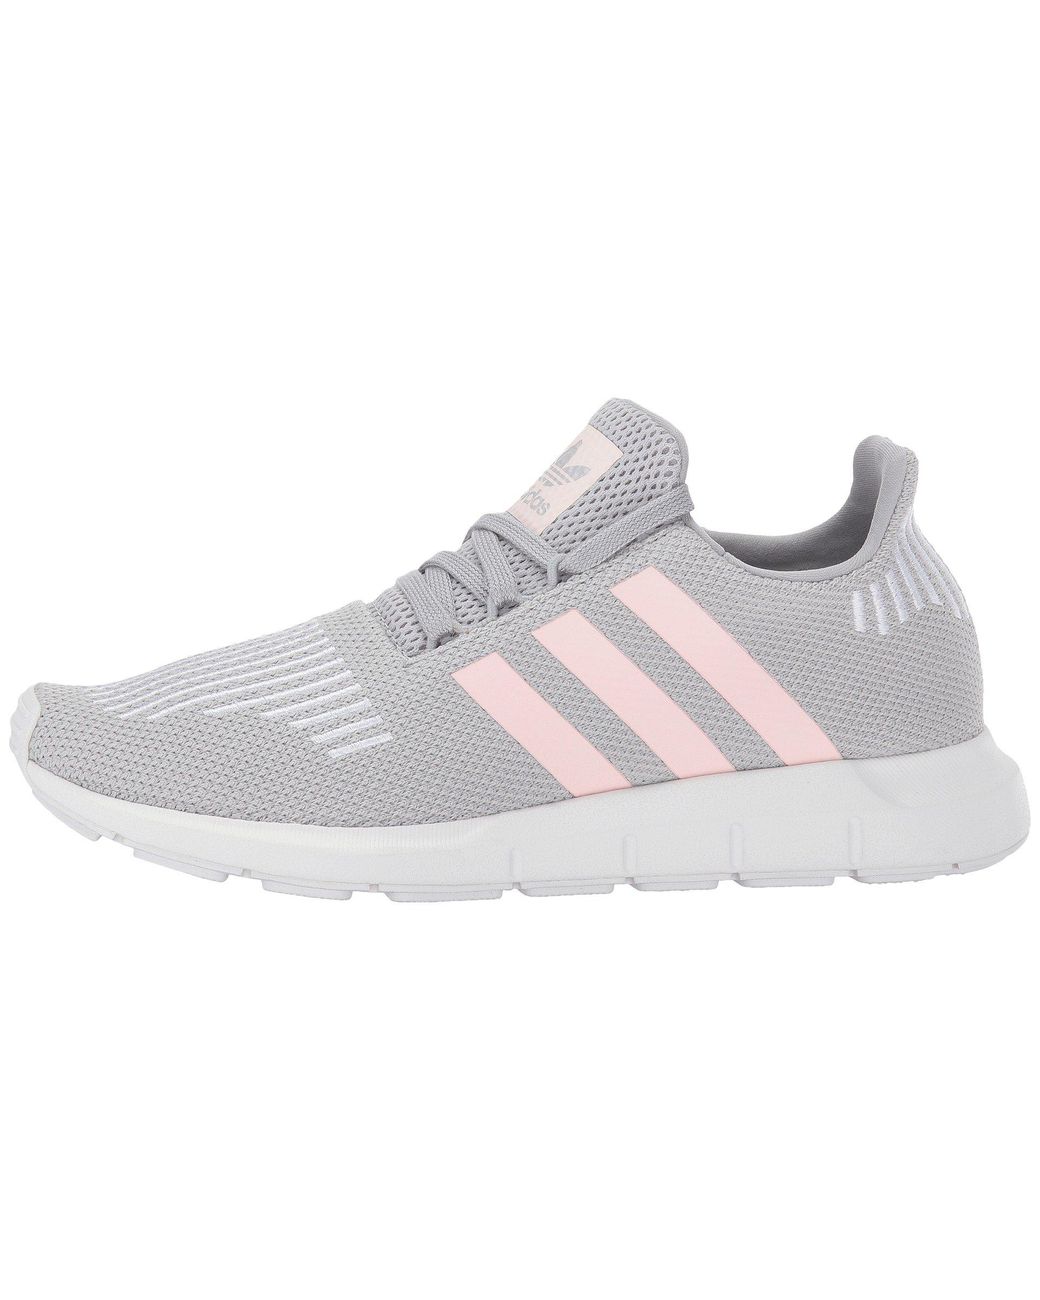 adidas Originals Rubber Swift Run W in Grey Two/Ice Pink/White (Gray) | Lyst